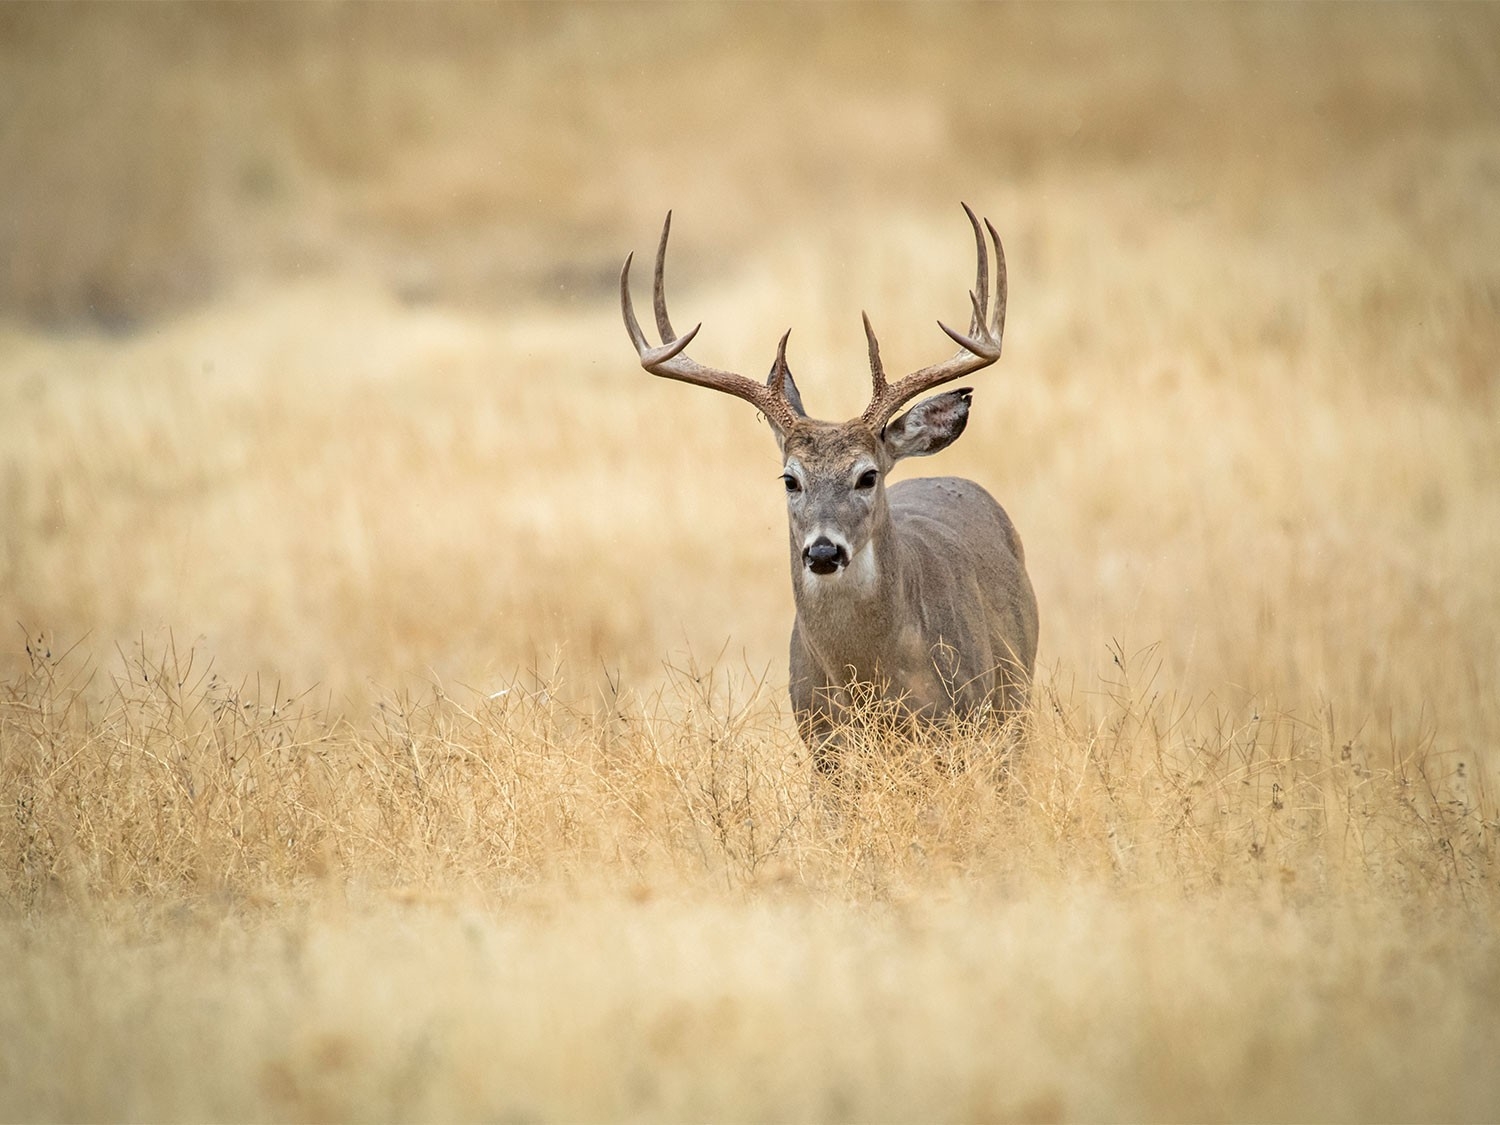 The 7 Best Days Of The 2020 Whitetail Deer Rut | Field &amp; Stream-Indiana 2021 Deer Rut